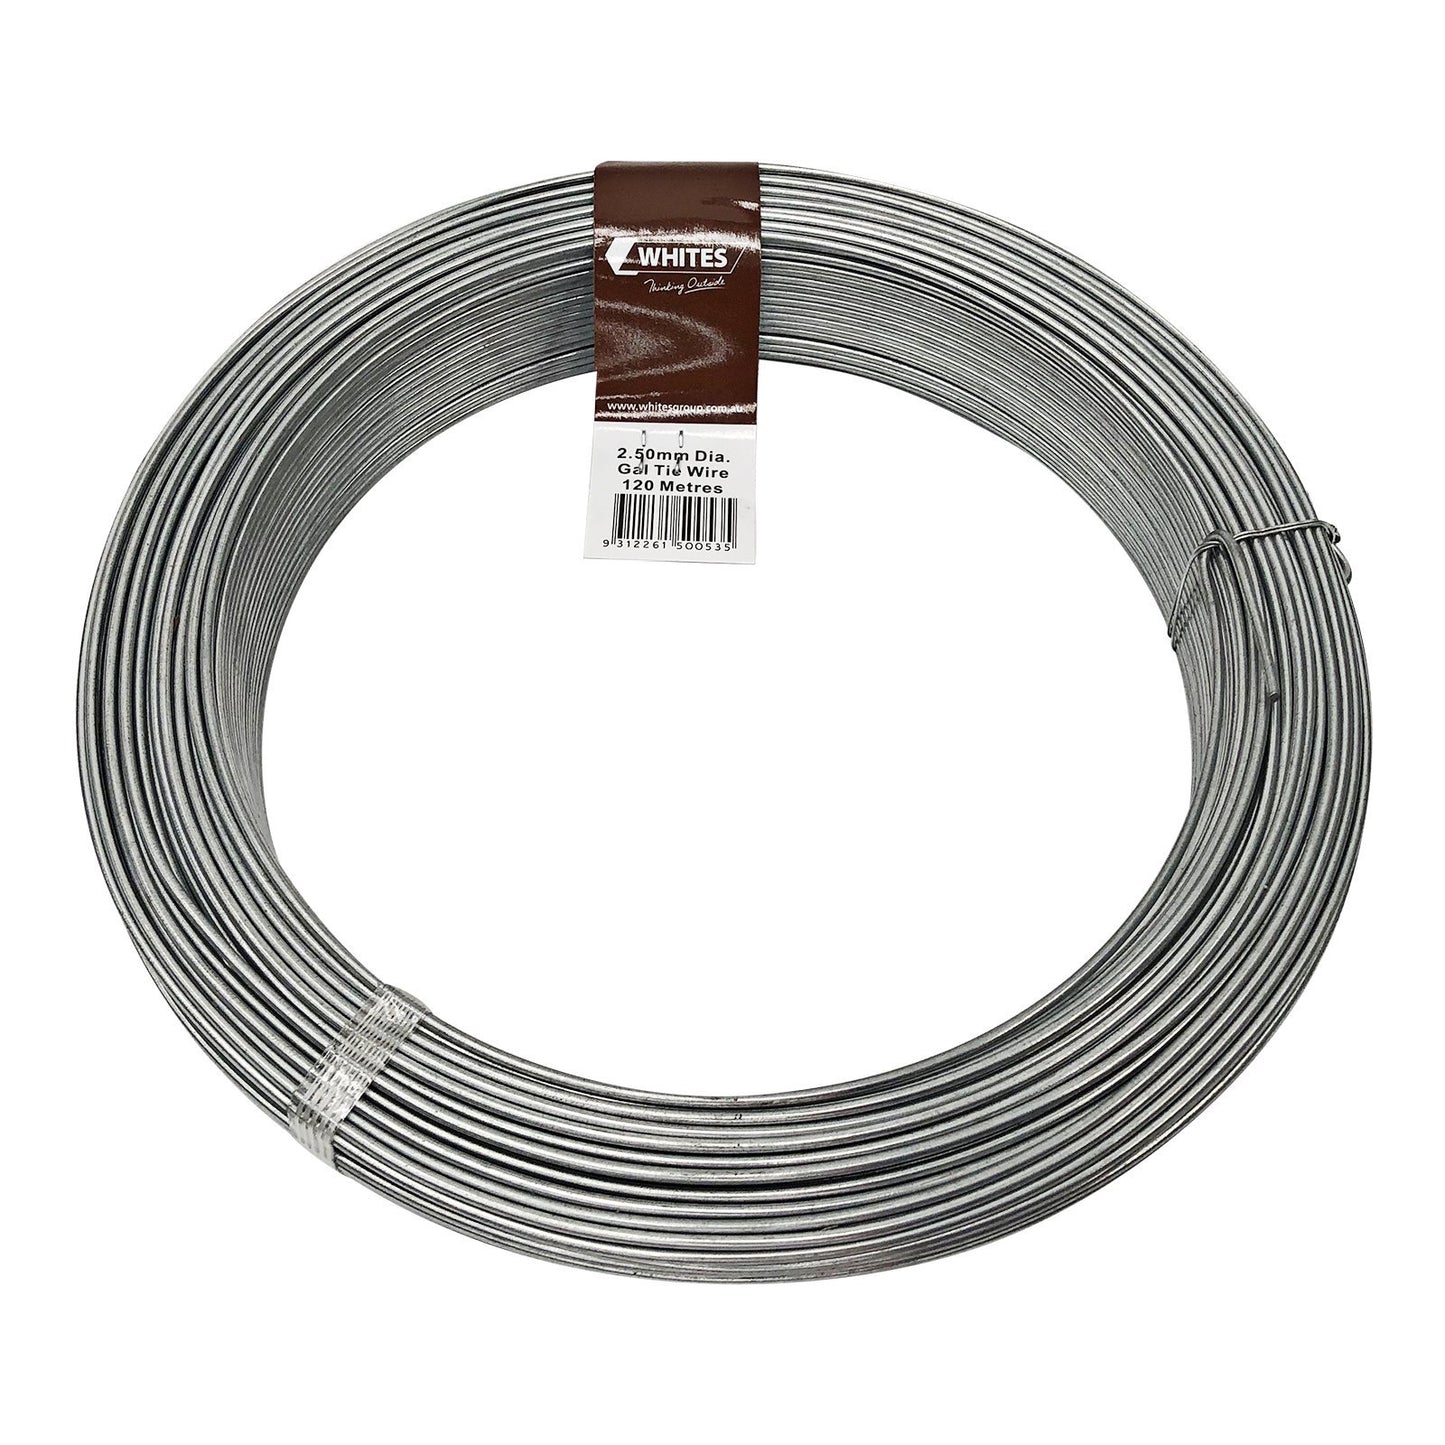 CABLE 2.5 MM – TINKIN